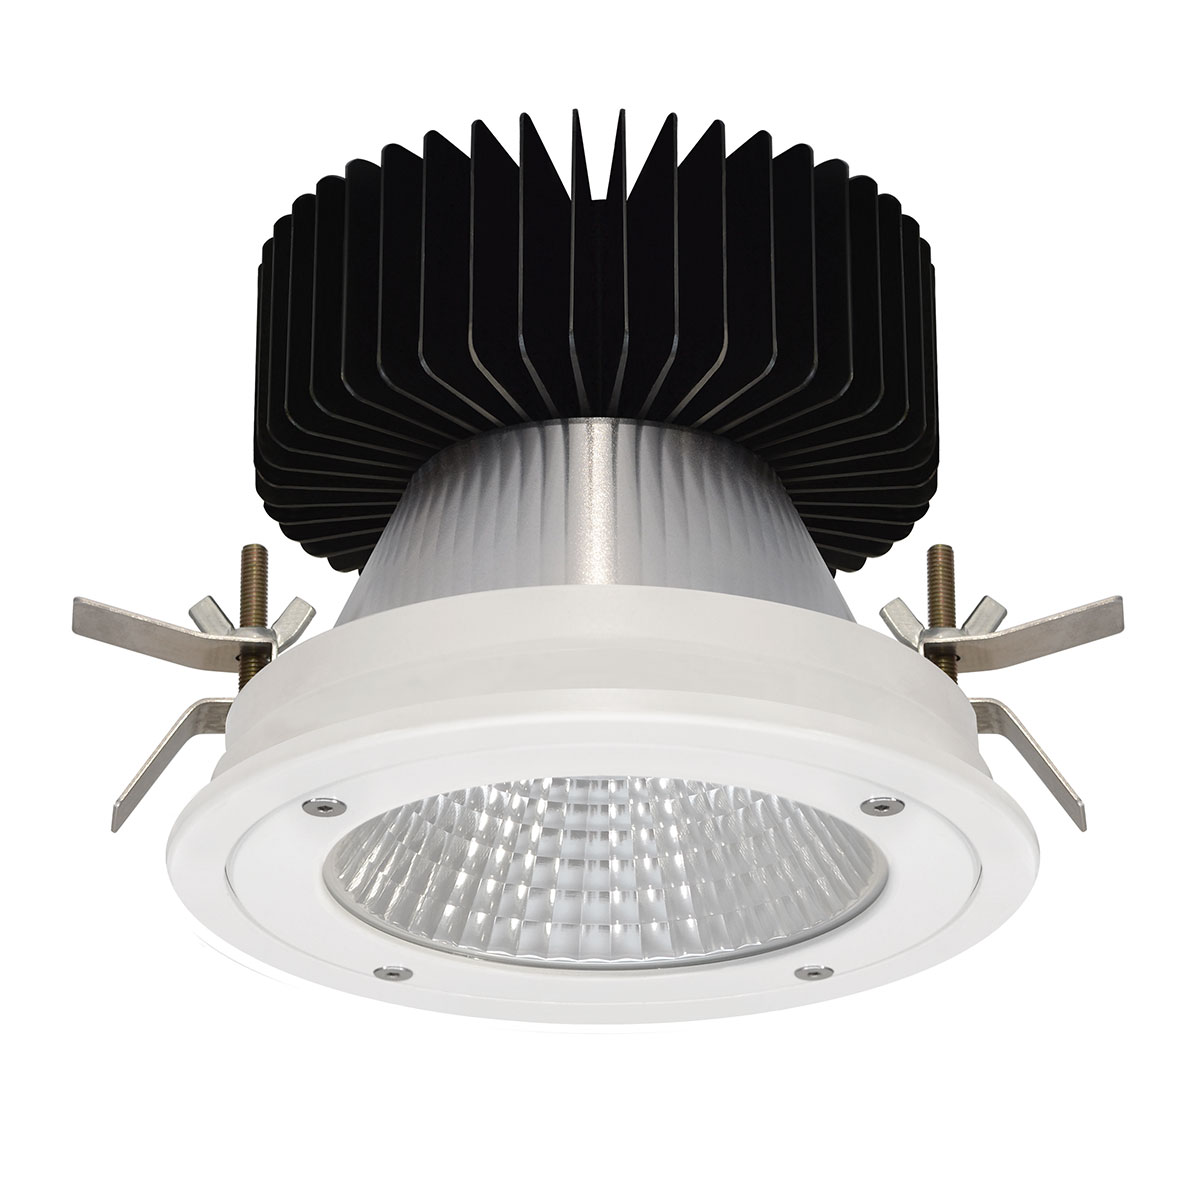 Kopa 16W Anti Tamper Fixed Round Recessed Downlight IP65 Rated 25° Degree Reflector White